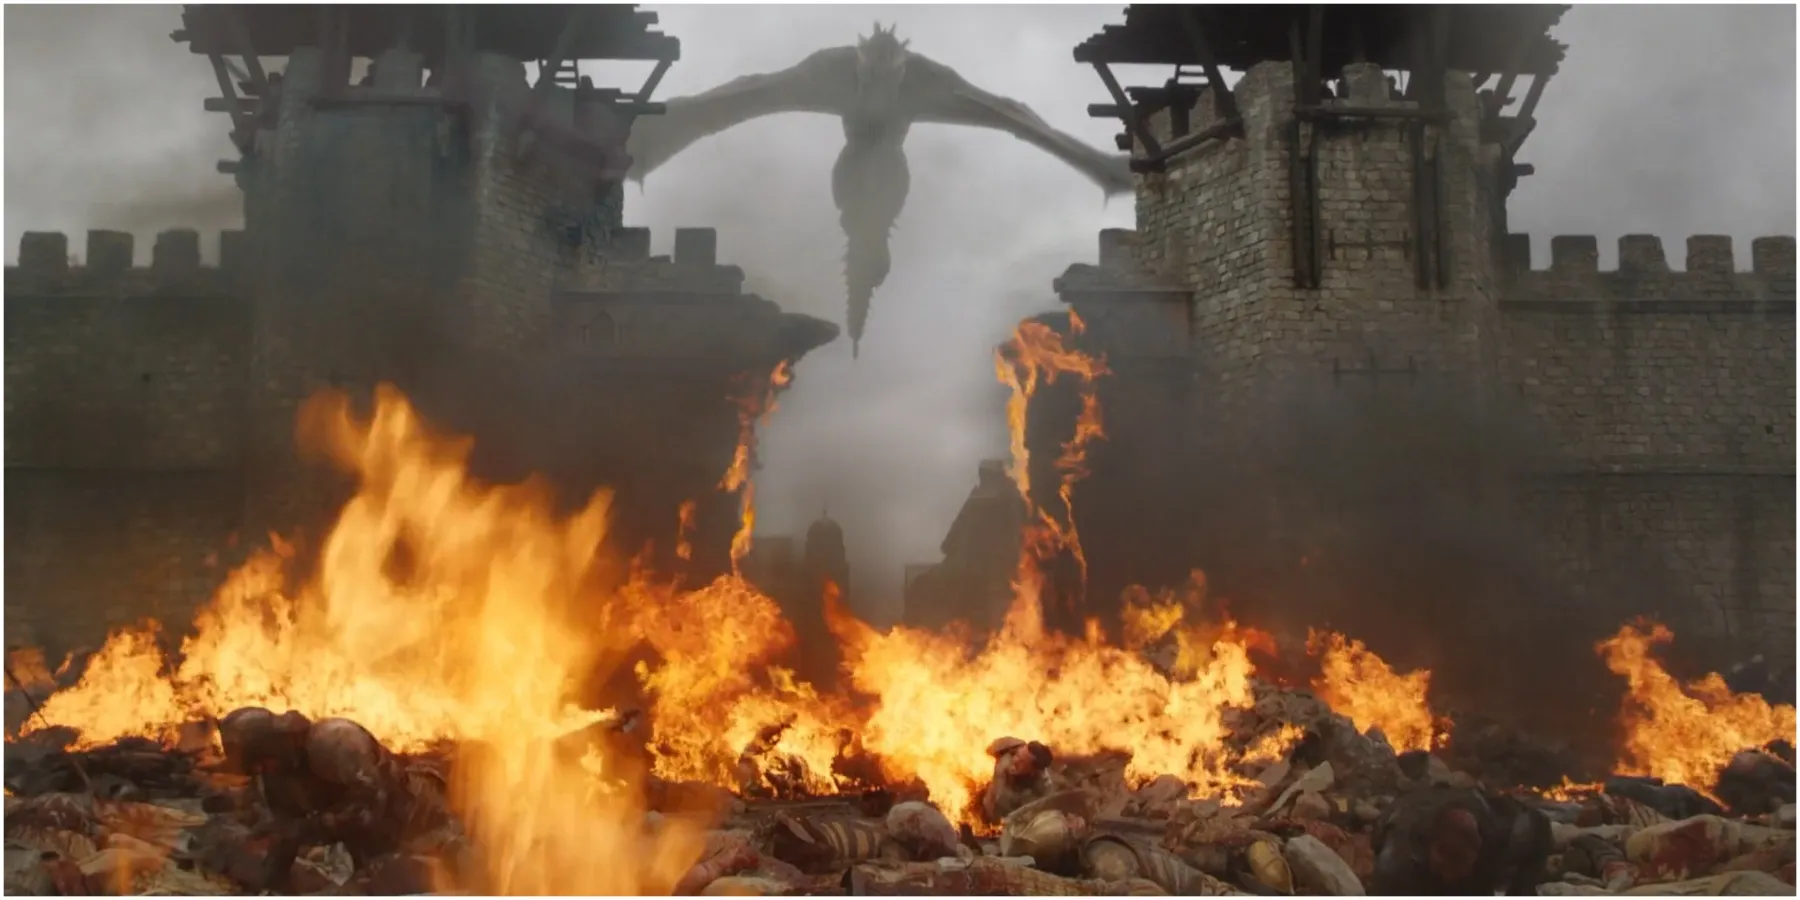 Drogon burns the city gates in Game of Thrones